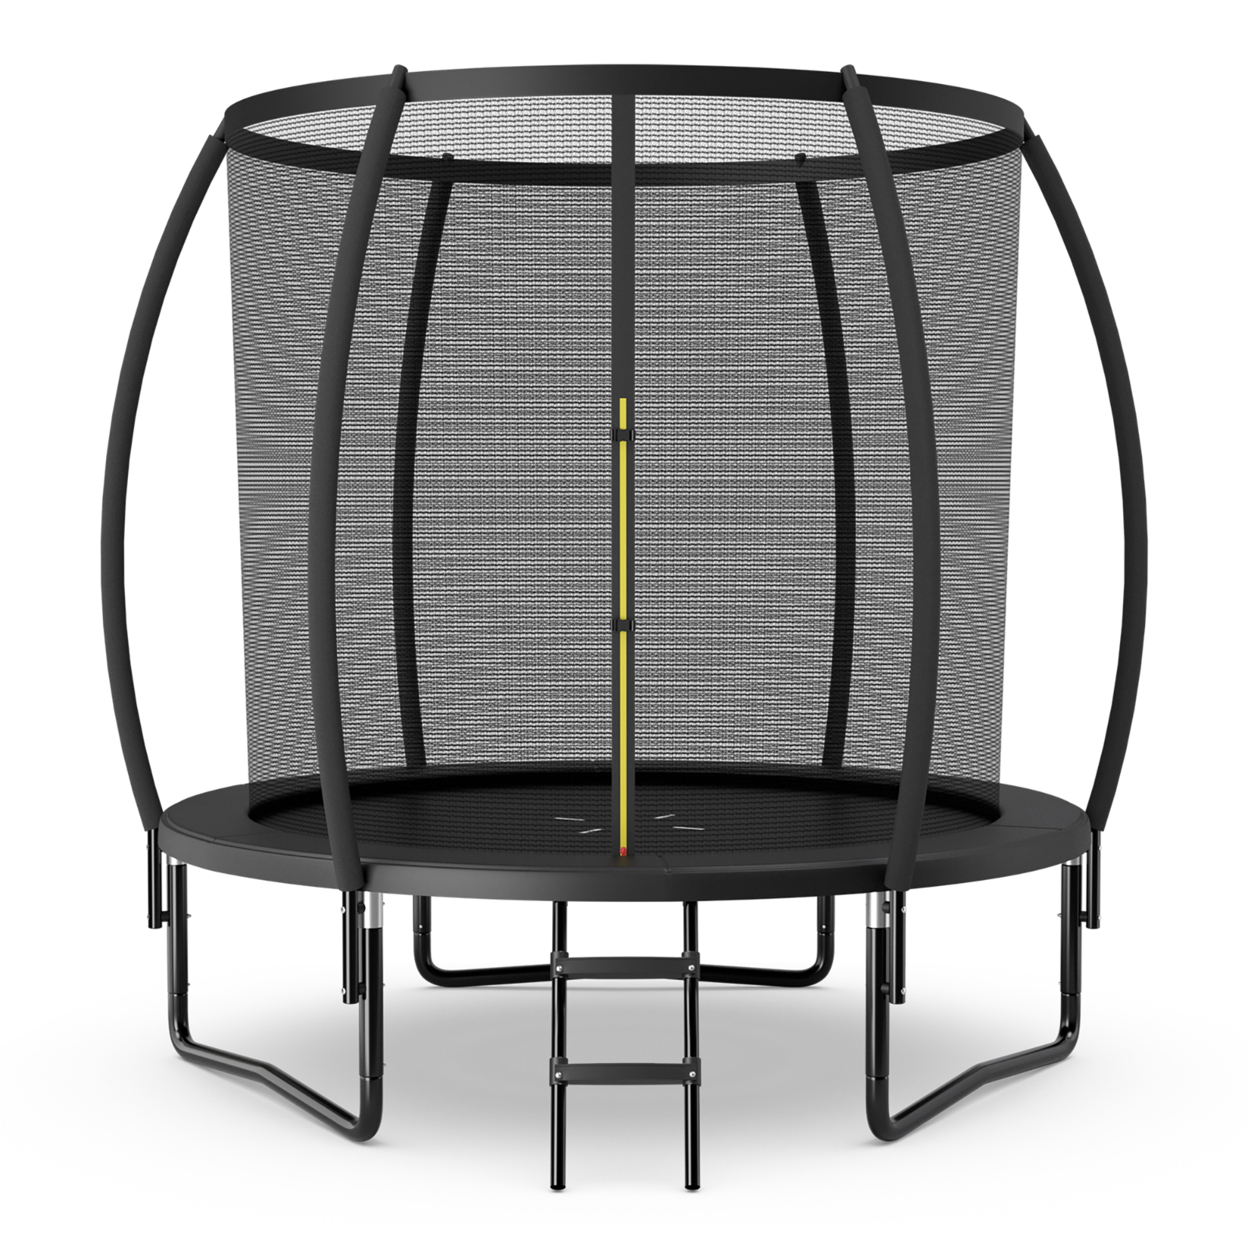 12FT Recreational Trampoline W/ Ladder Enclosure Net Safety Pad Outdoor - Blue